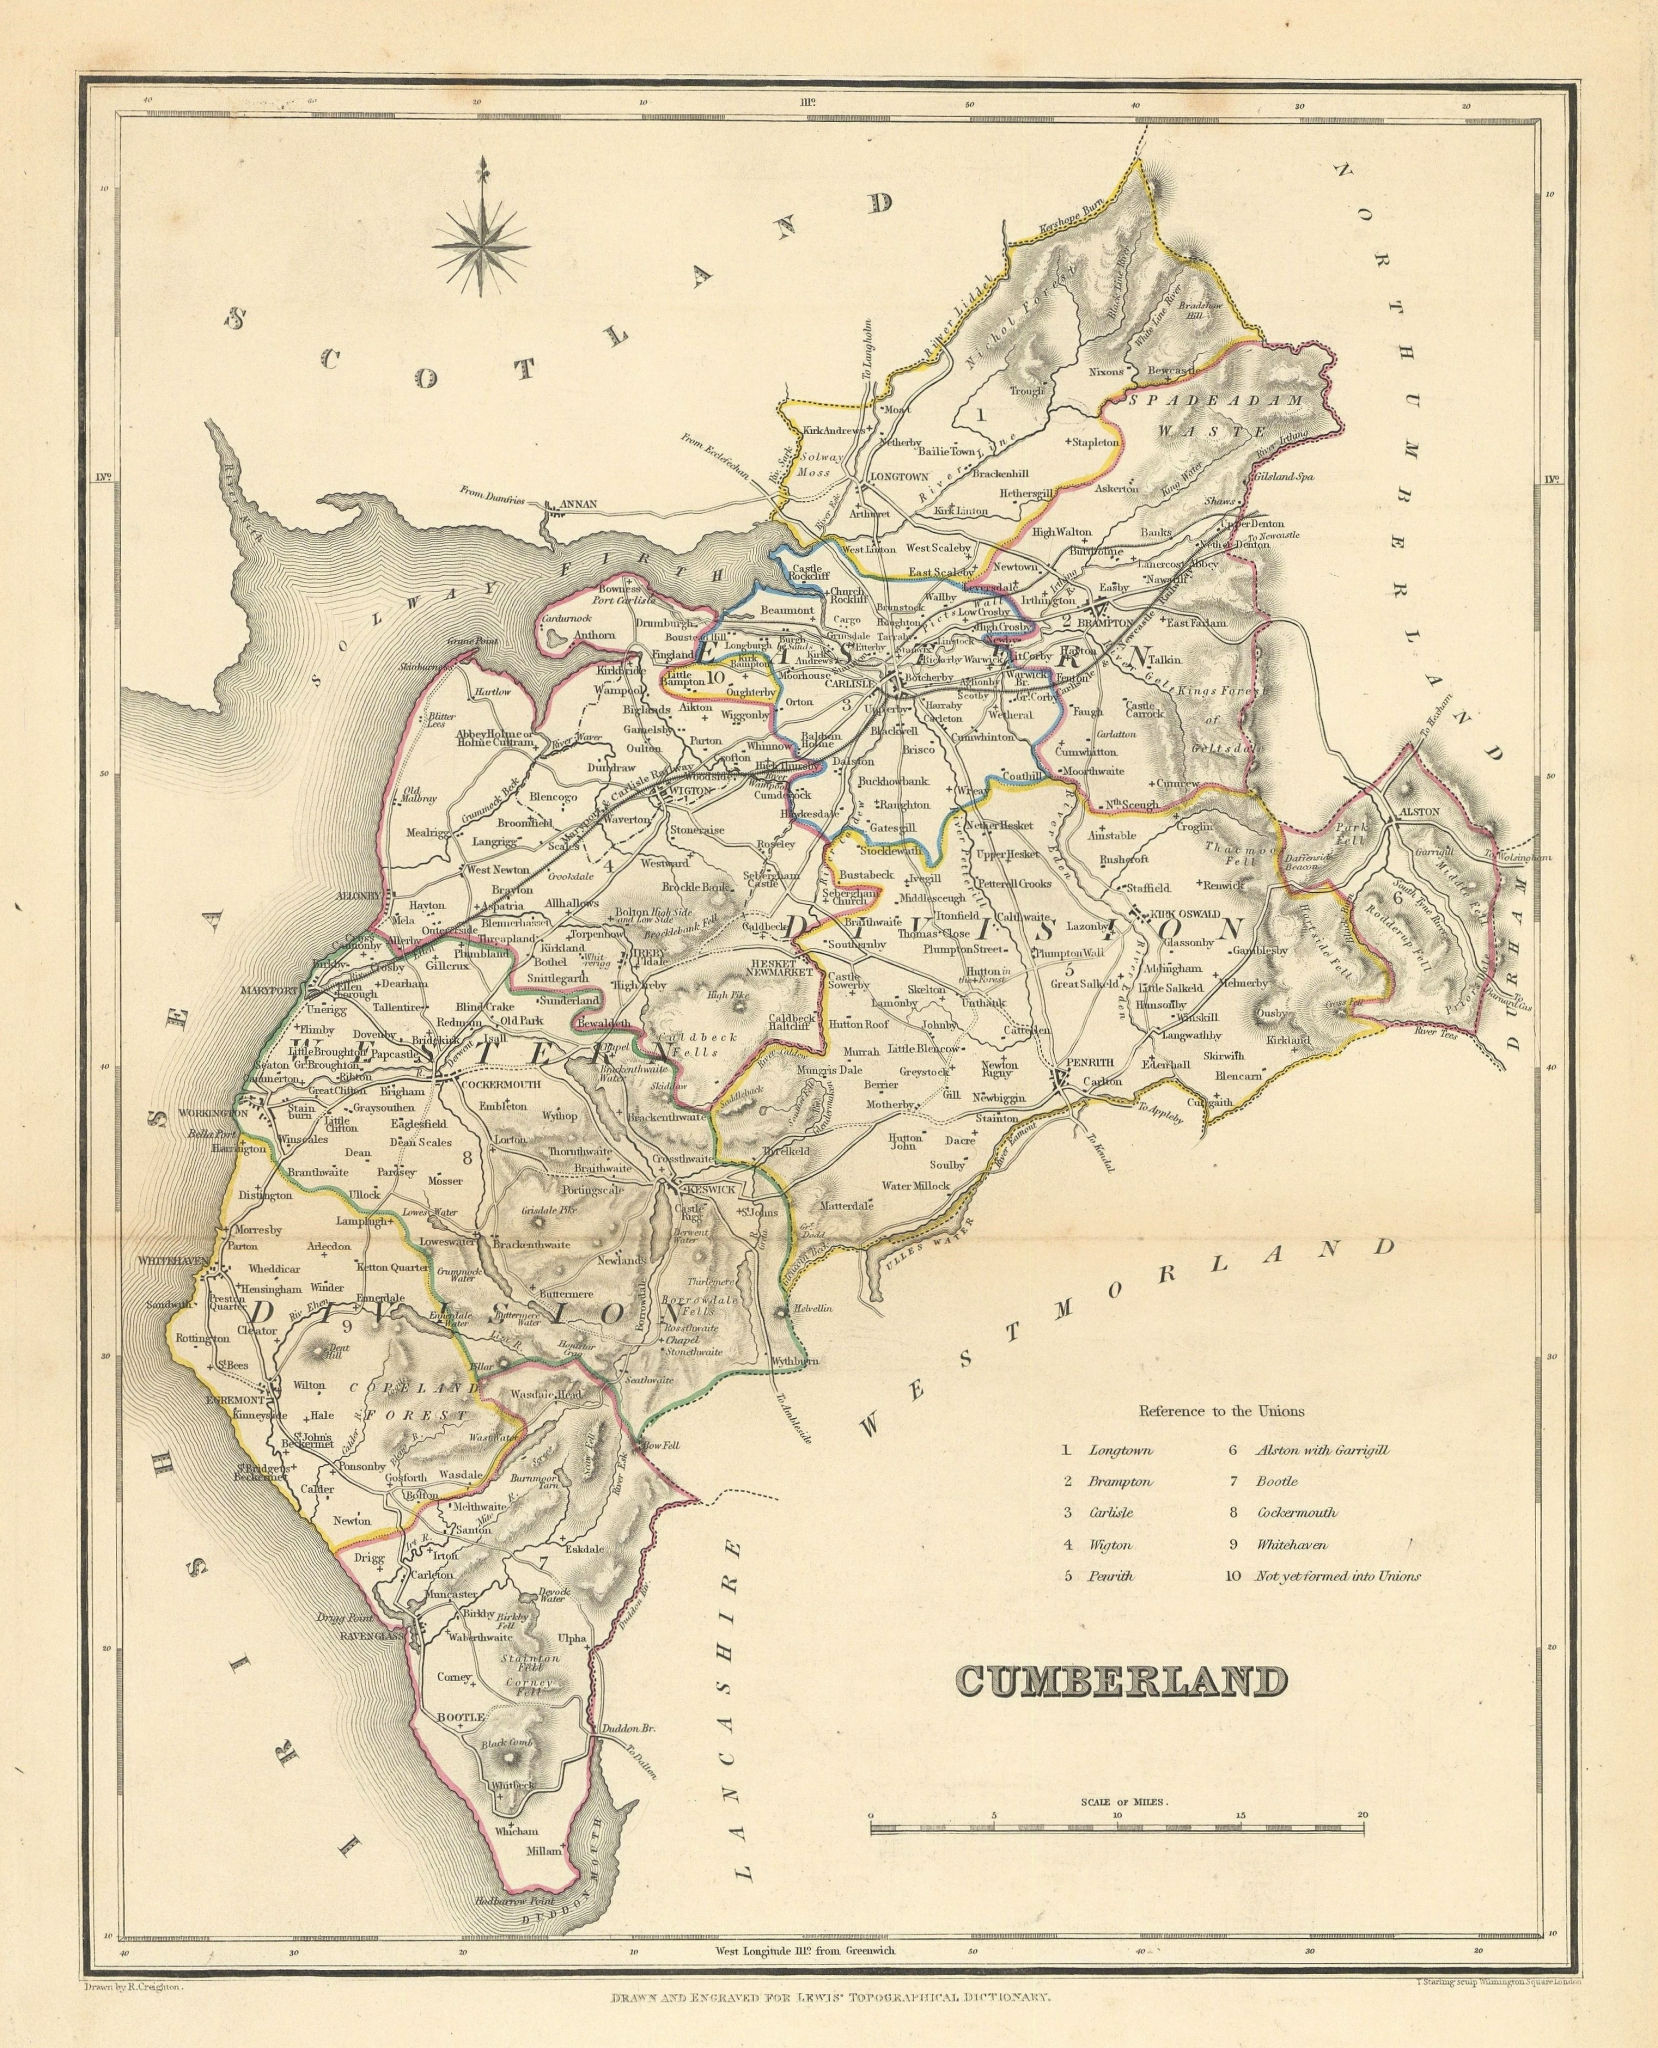 Associate Product Antique county map of CUMBERLAND / Cumbria by Creighton, Starling & Lewis c1840